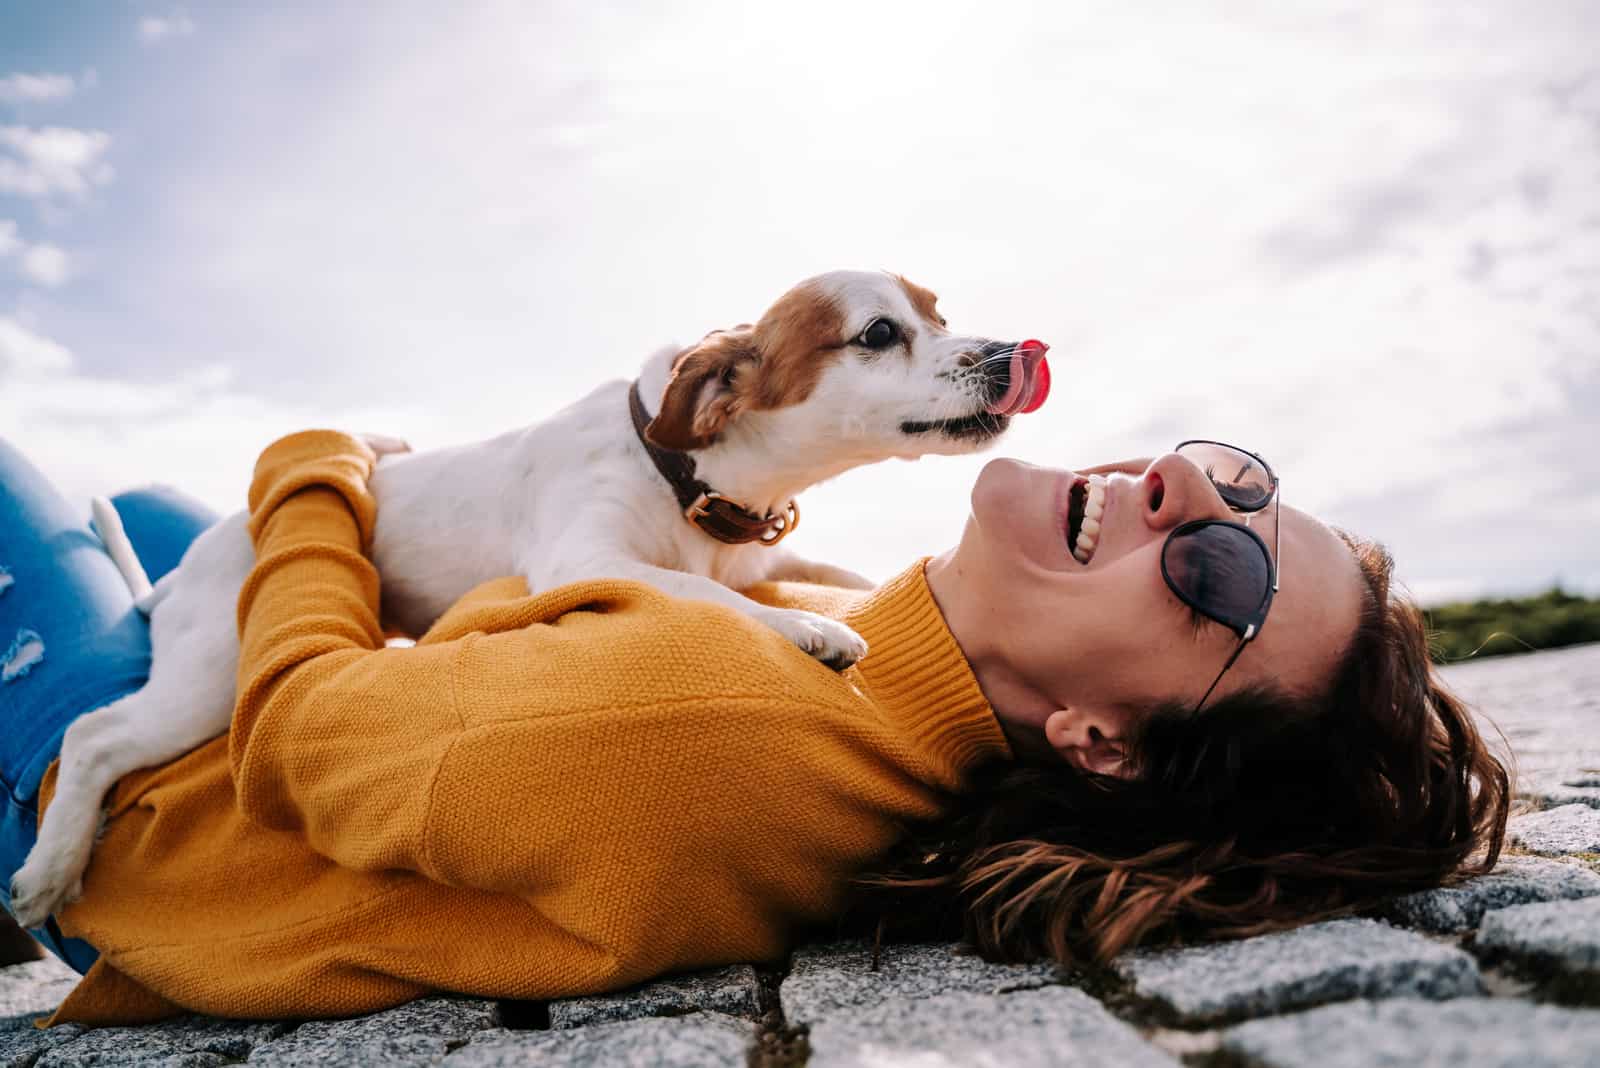 A beautiful woman laughing while her pet is licking her face